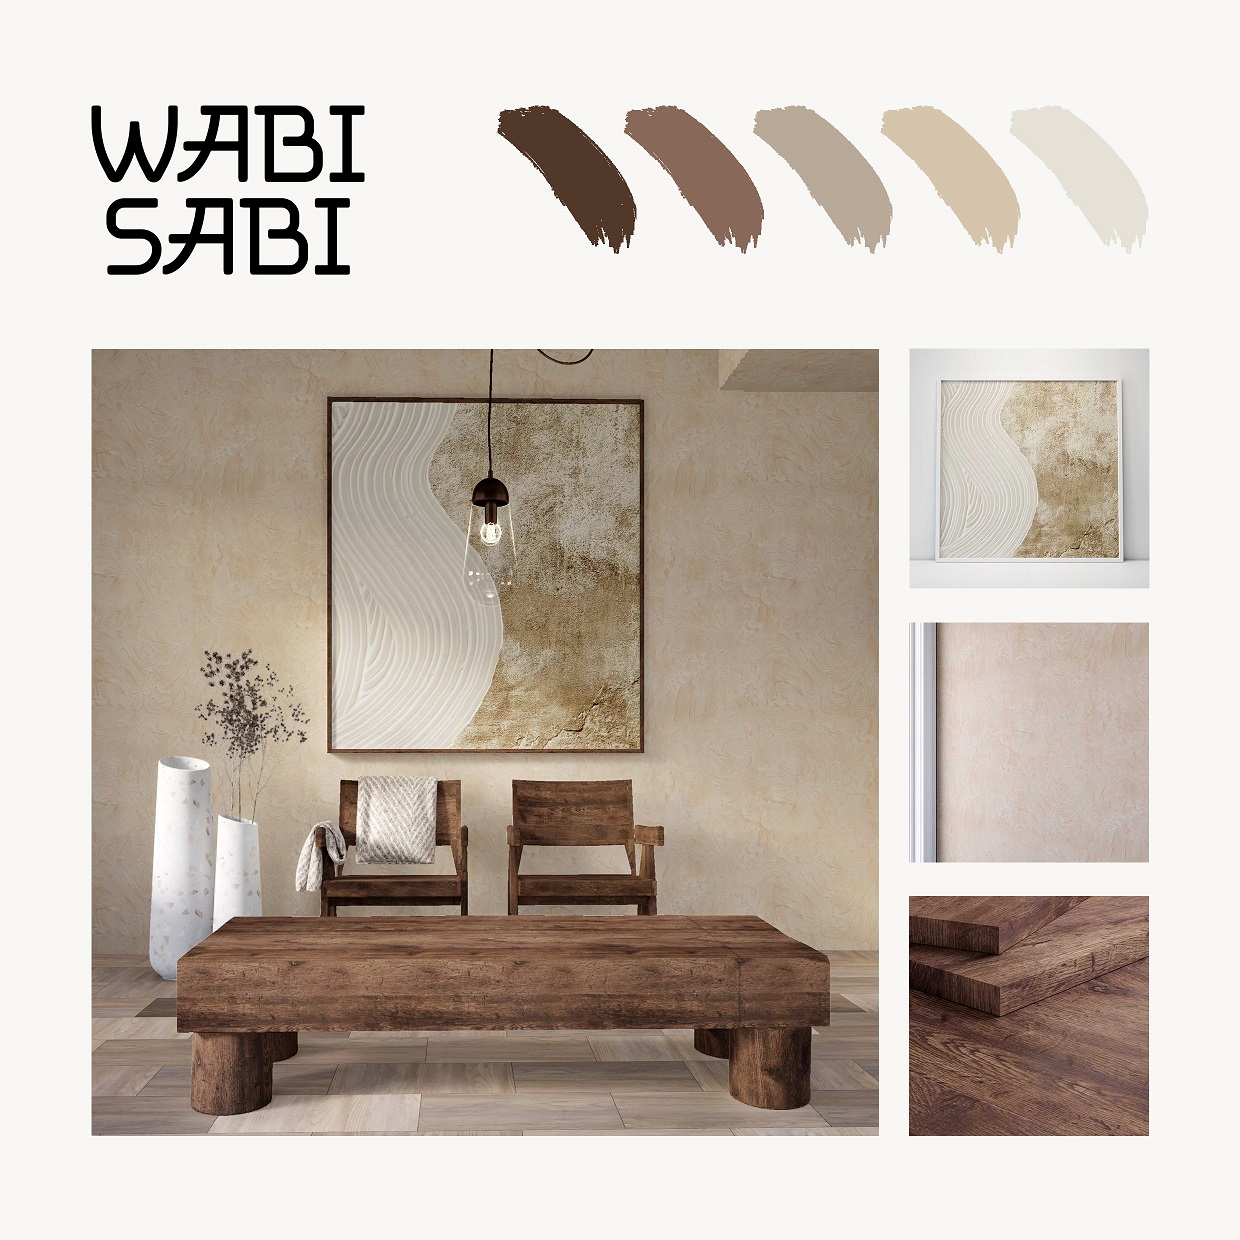 a living room design inspired by the wabi sabi style